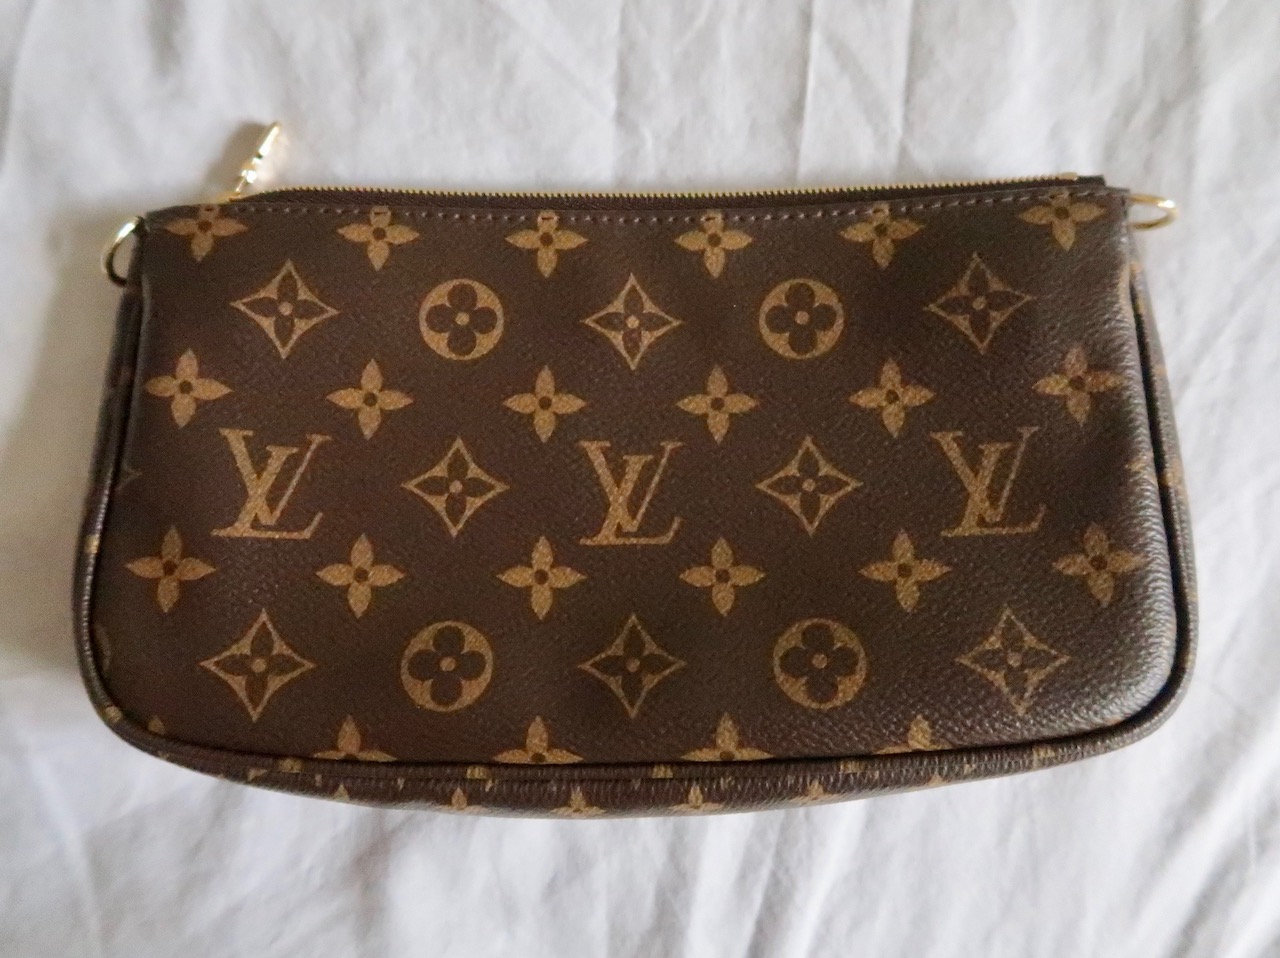 How To Spot Louis Vuitton Multi Pochette Accessoires + Bag Review + Youtube video | The Beauty Junkee